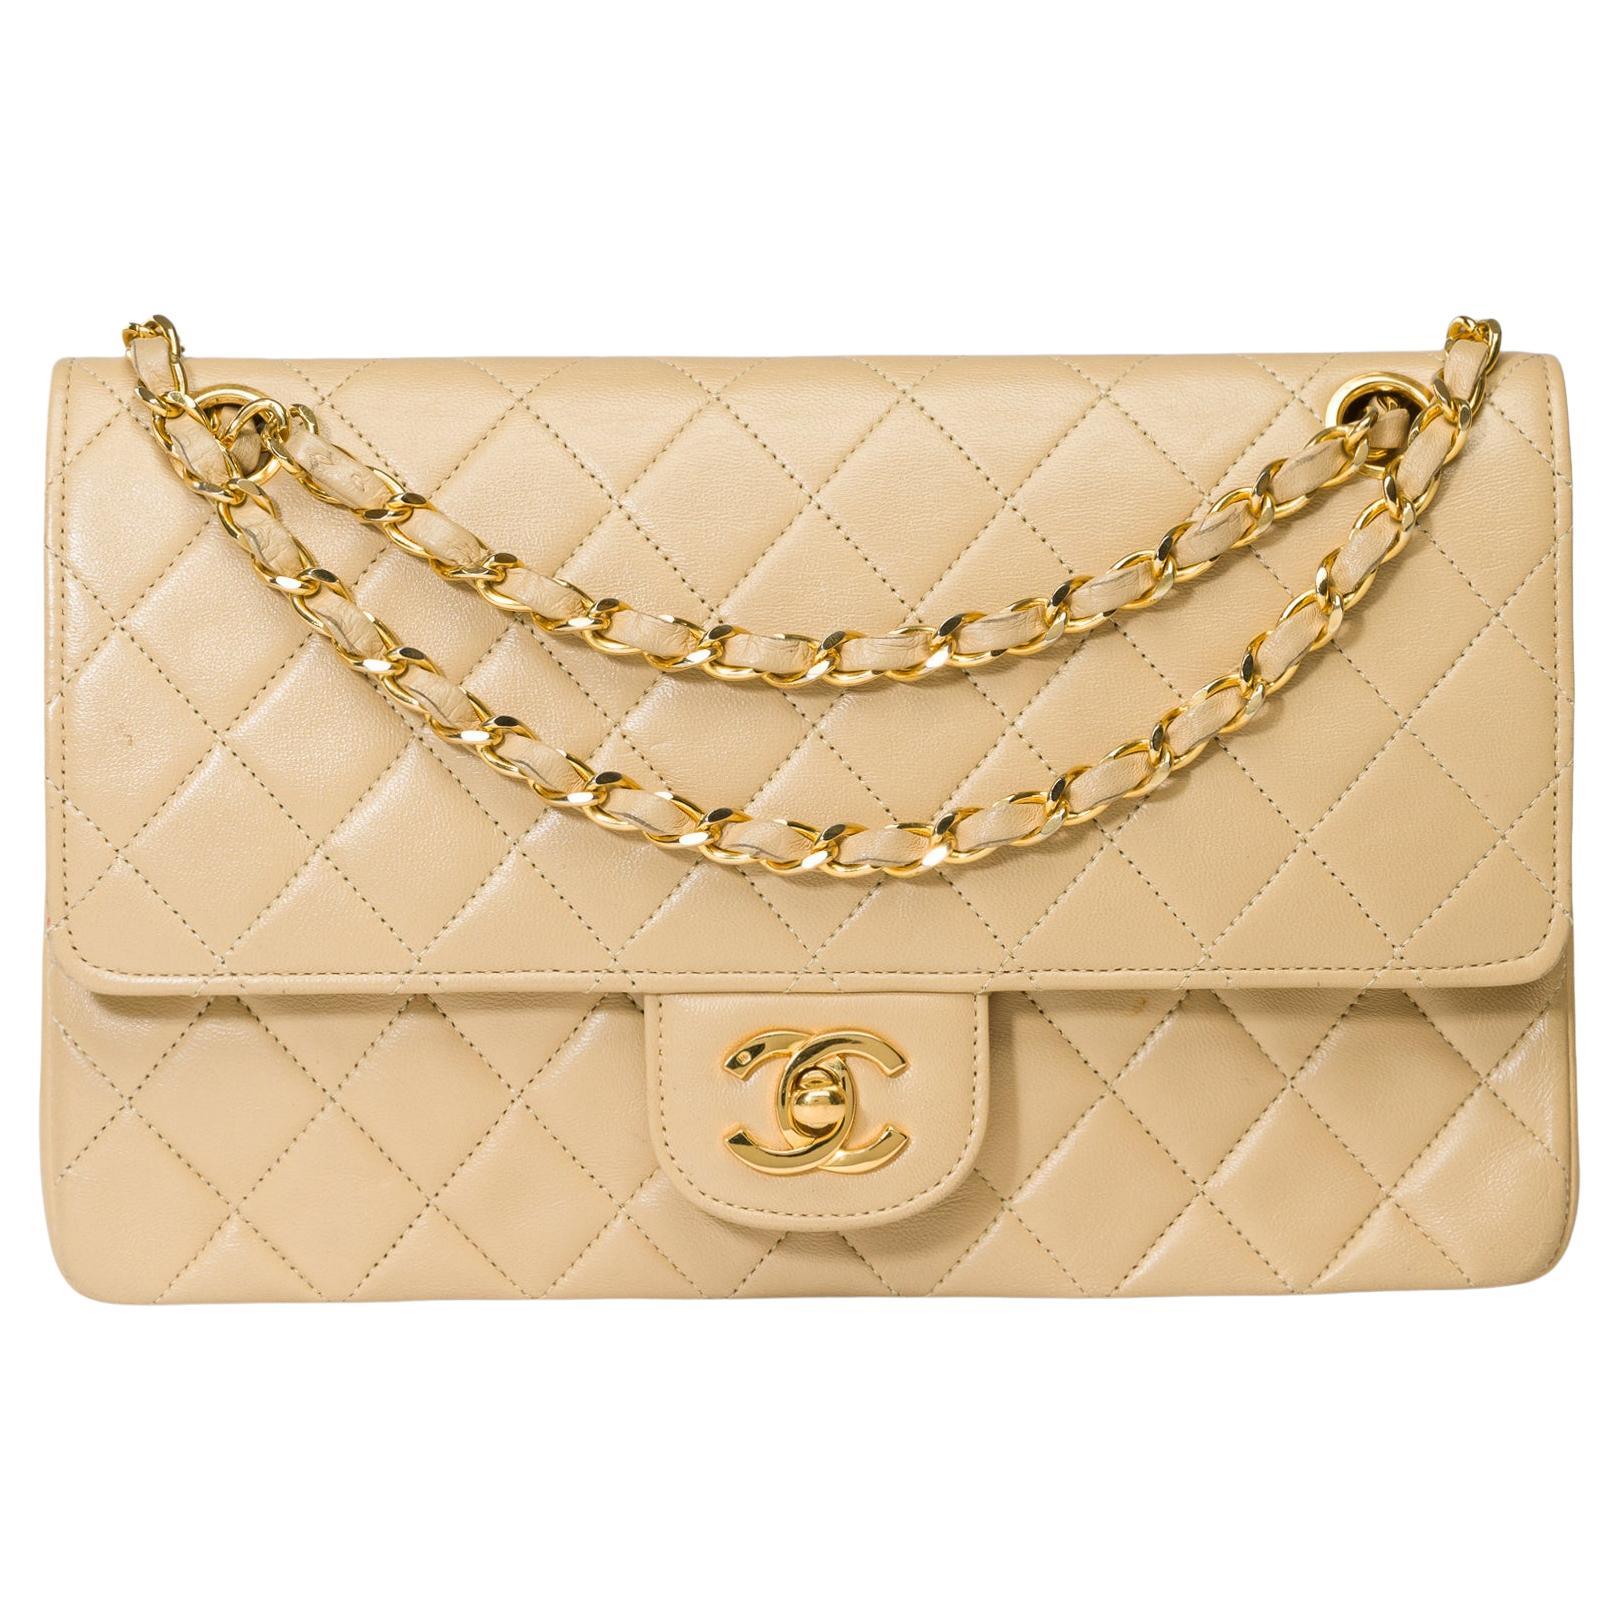 Chanel Timeless double flap shoulder bag in beige quilted lambskin leather, GHW